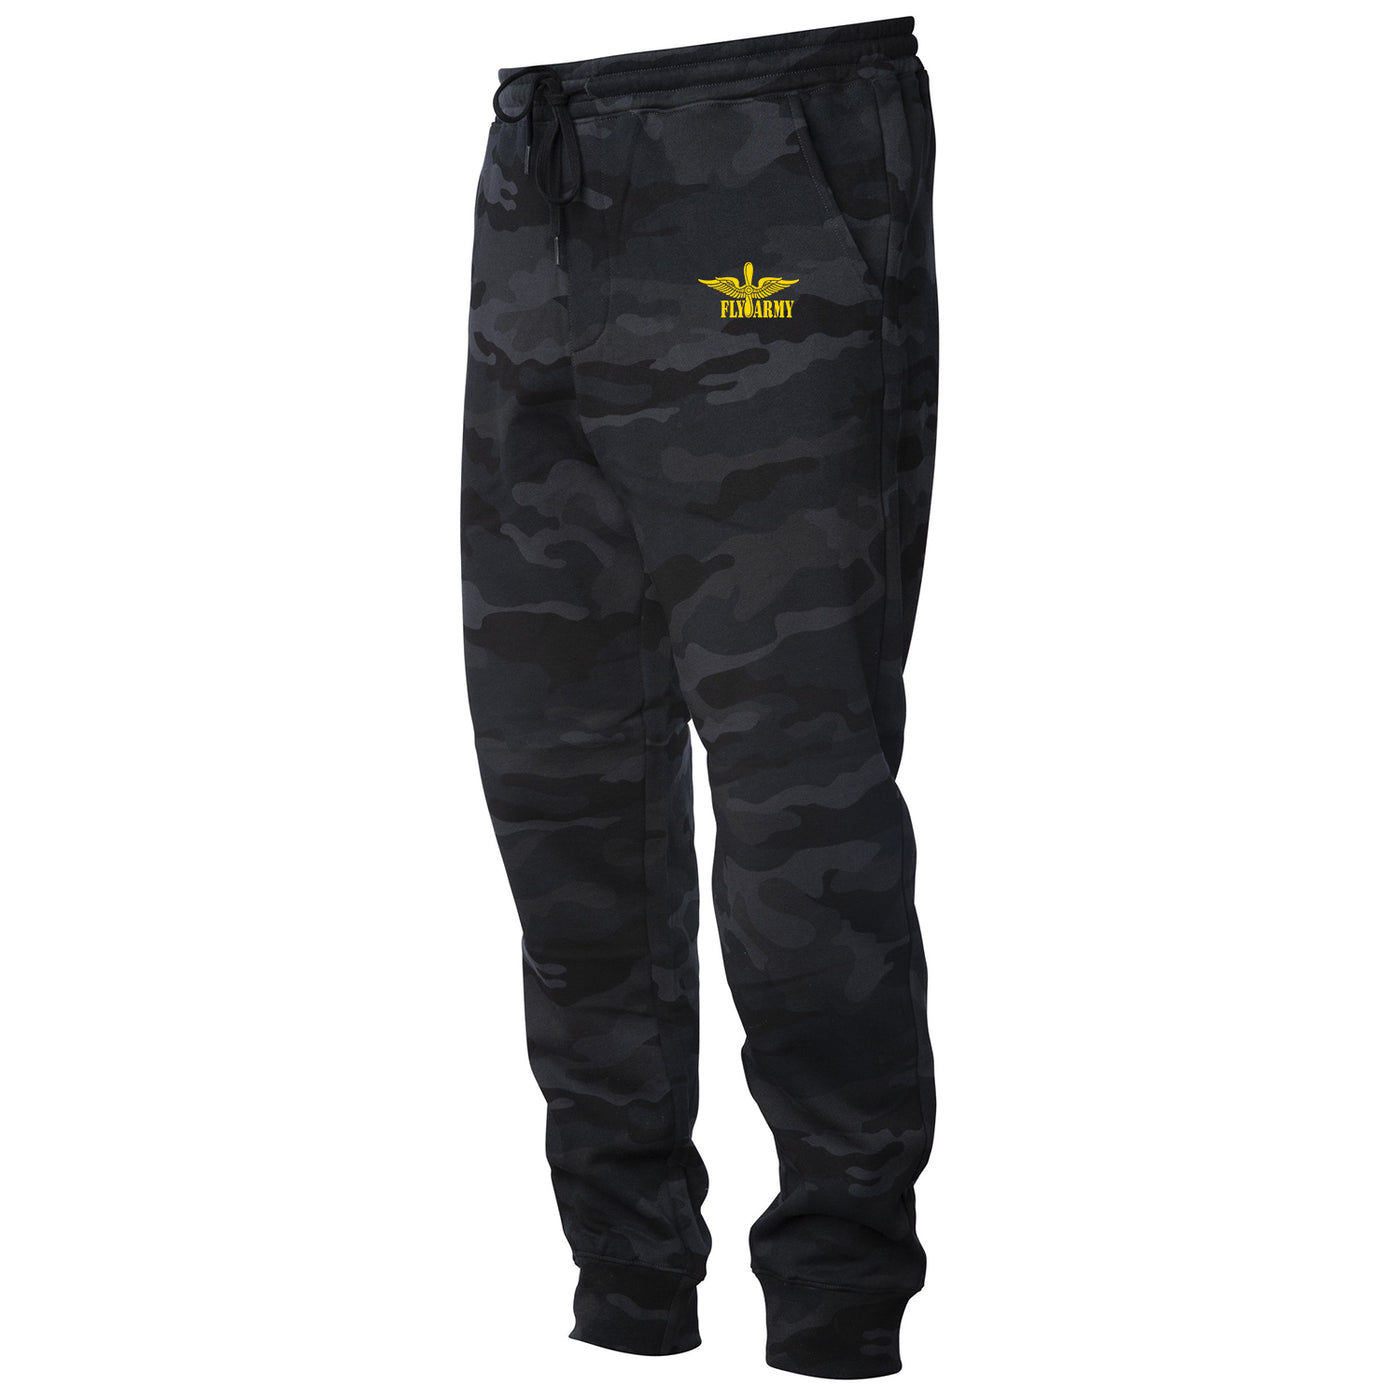 Fly Army Sweatpants